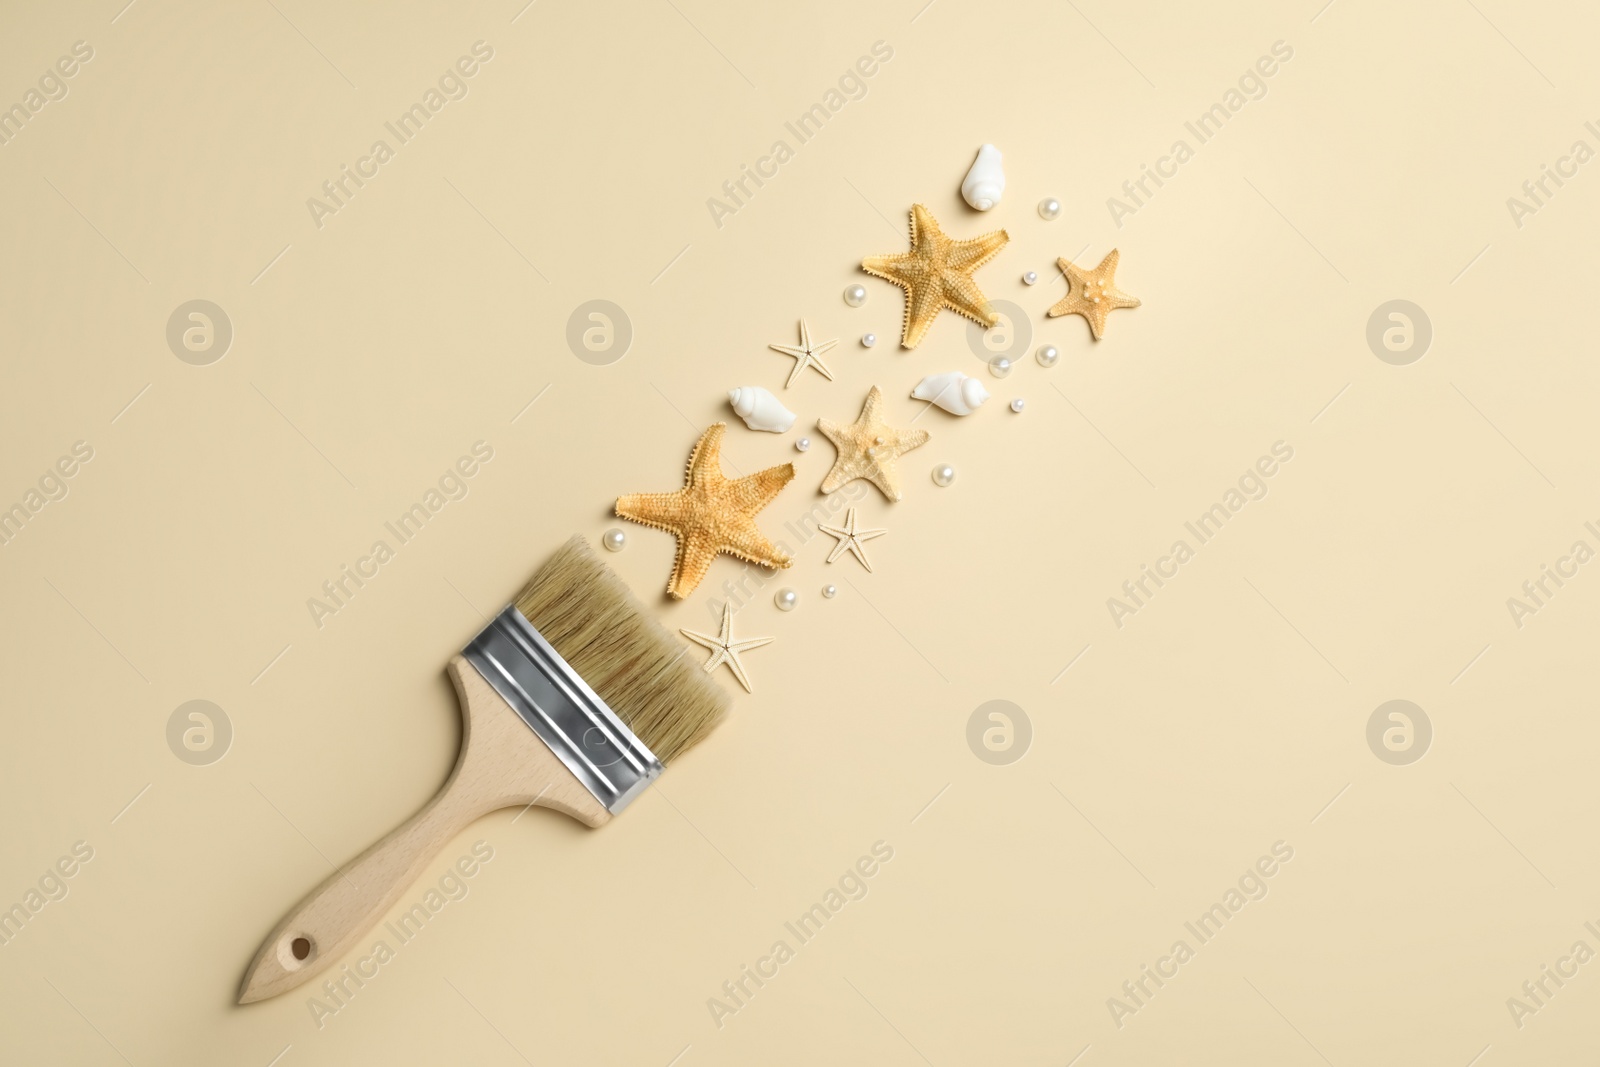 Photo of Brush painting with sea stars, pearls and shells on beige background, flat lay. Creative concept